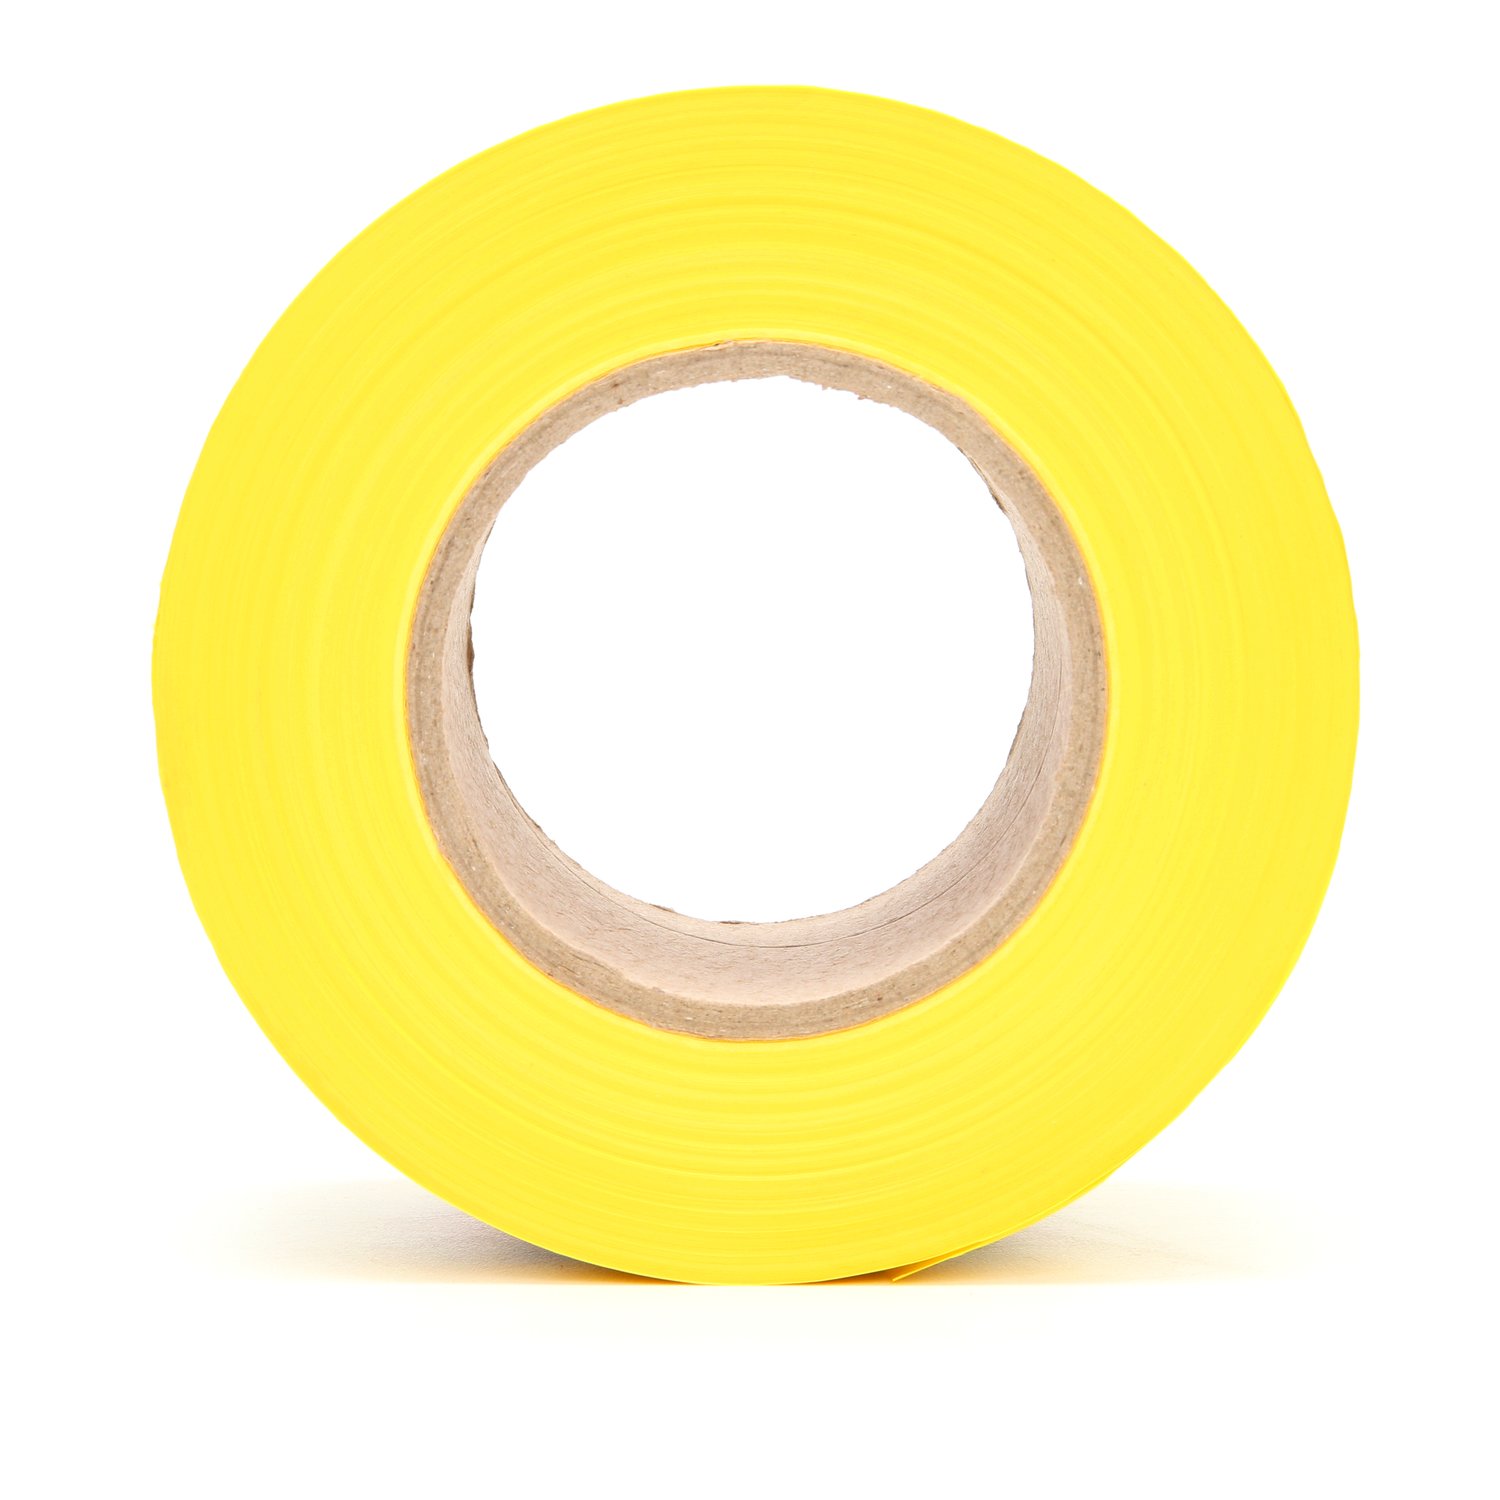 7100057611 - Scotch Barricade Tape 361, CAUTION DO NOT ENTER, 3 in x 1000 ft,
Yellow, 8 rolls/Case